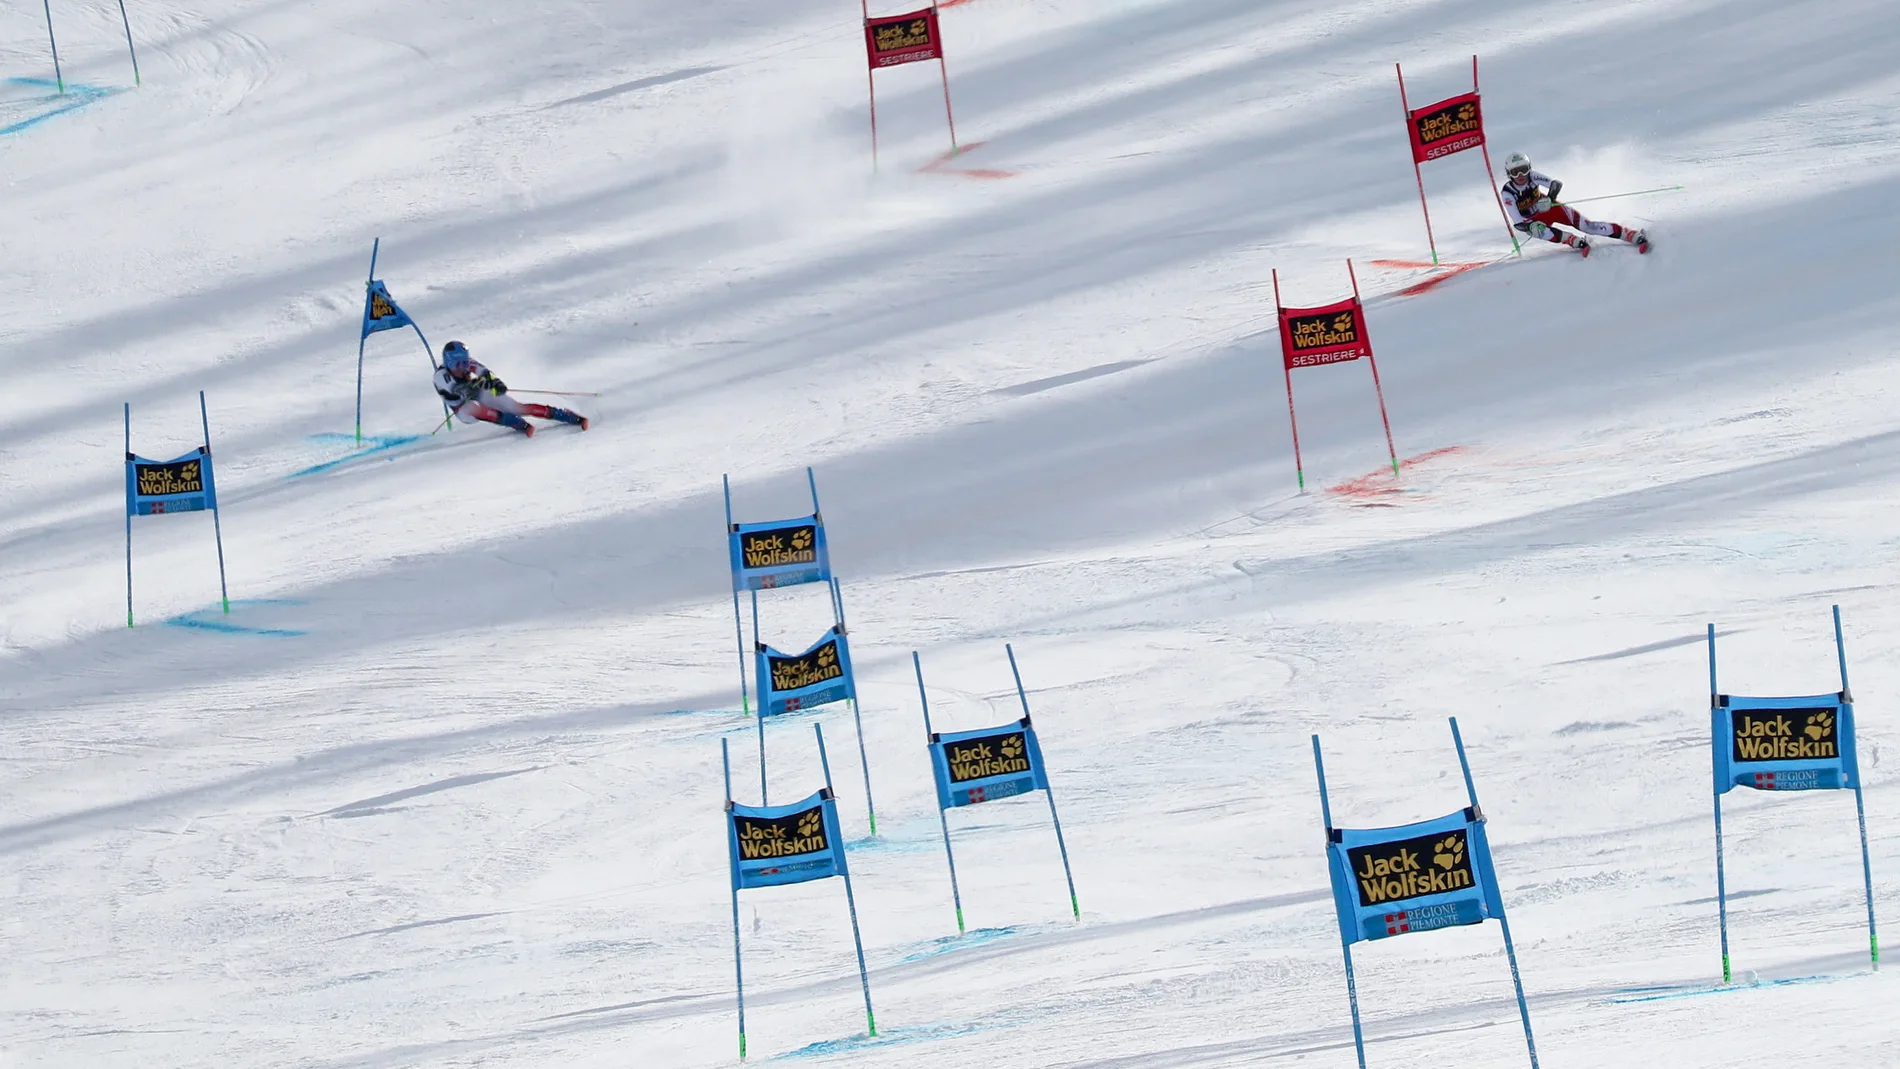 FIS Alpine Skiing World Cup in Sestriere